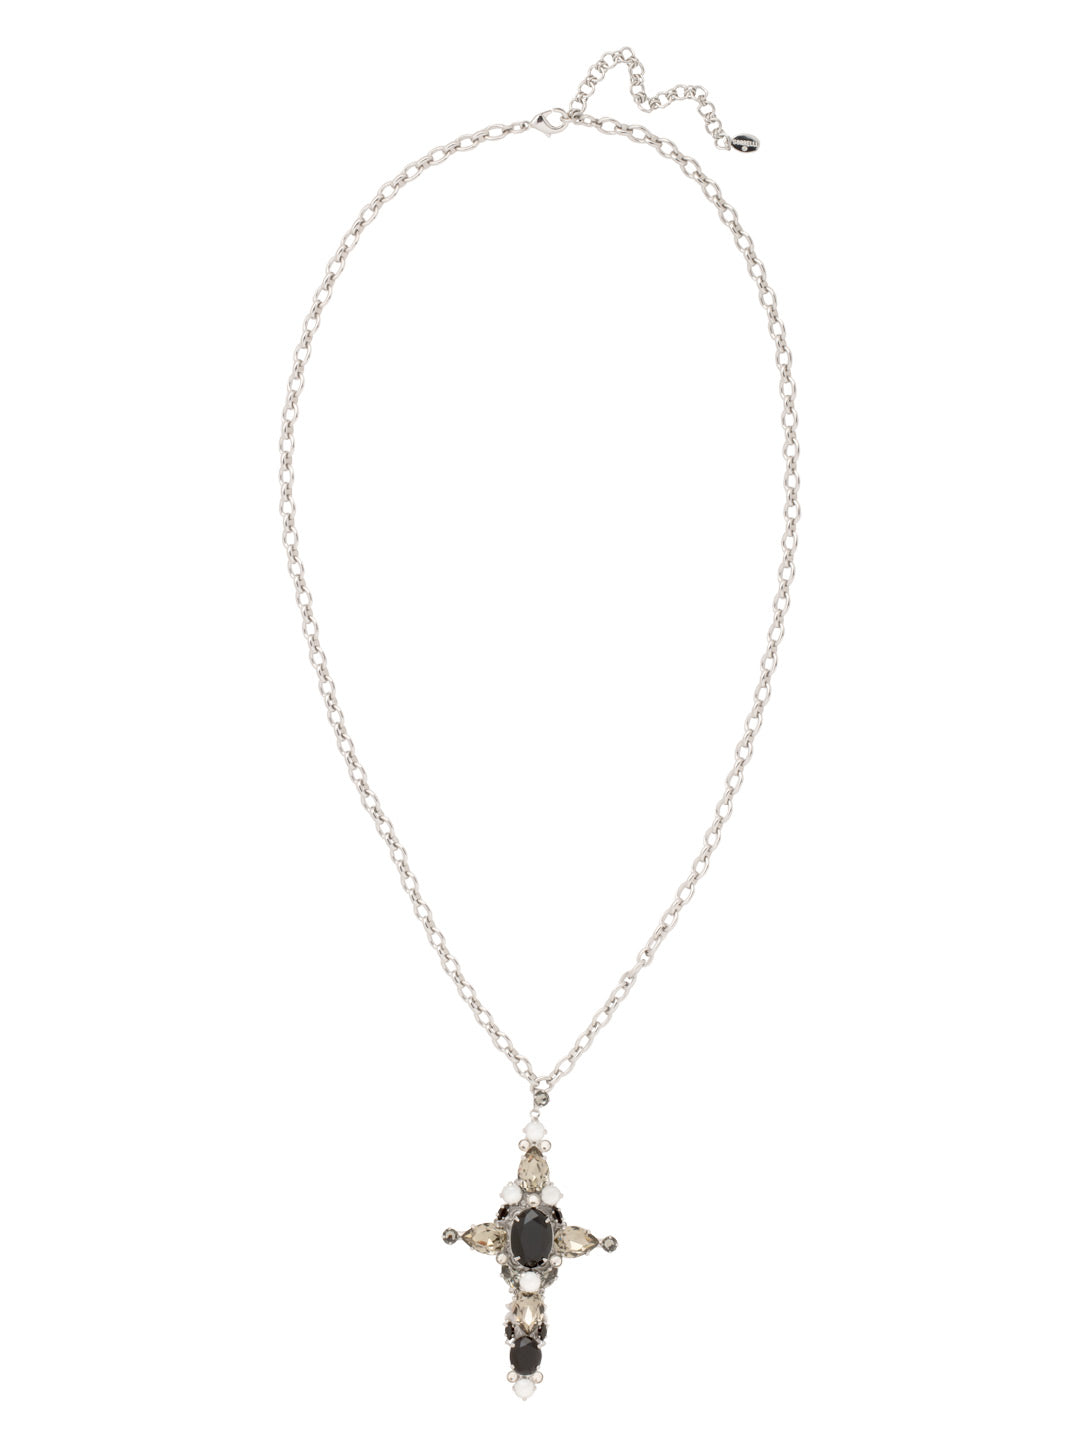 Chrissy Long Necklace - NFC18PDSNI - <p>The Chrissy Long Necklace features an oversized embellished cross pendant on an adjustable chain with a lobster claw clasp. From Sorrelli's Starry Night collection in our Palladium finish.</p>